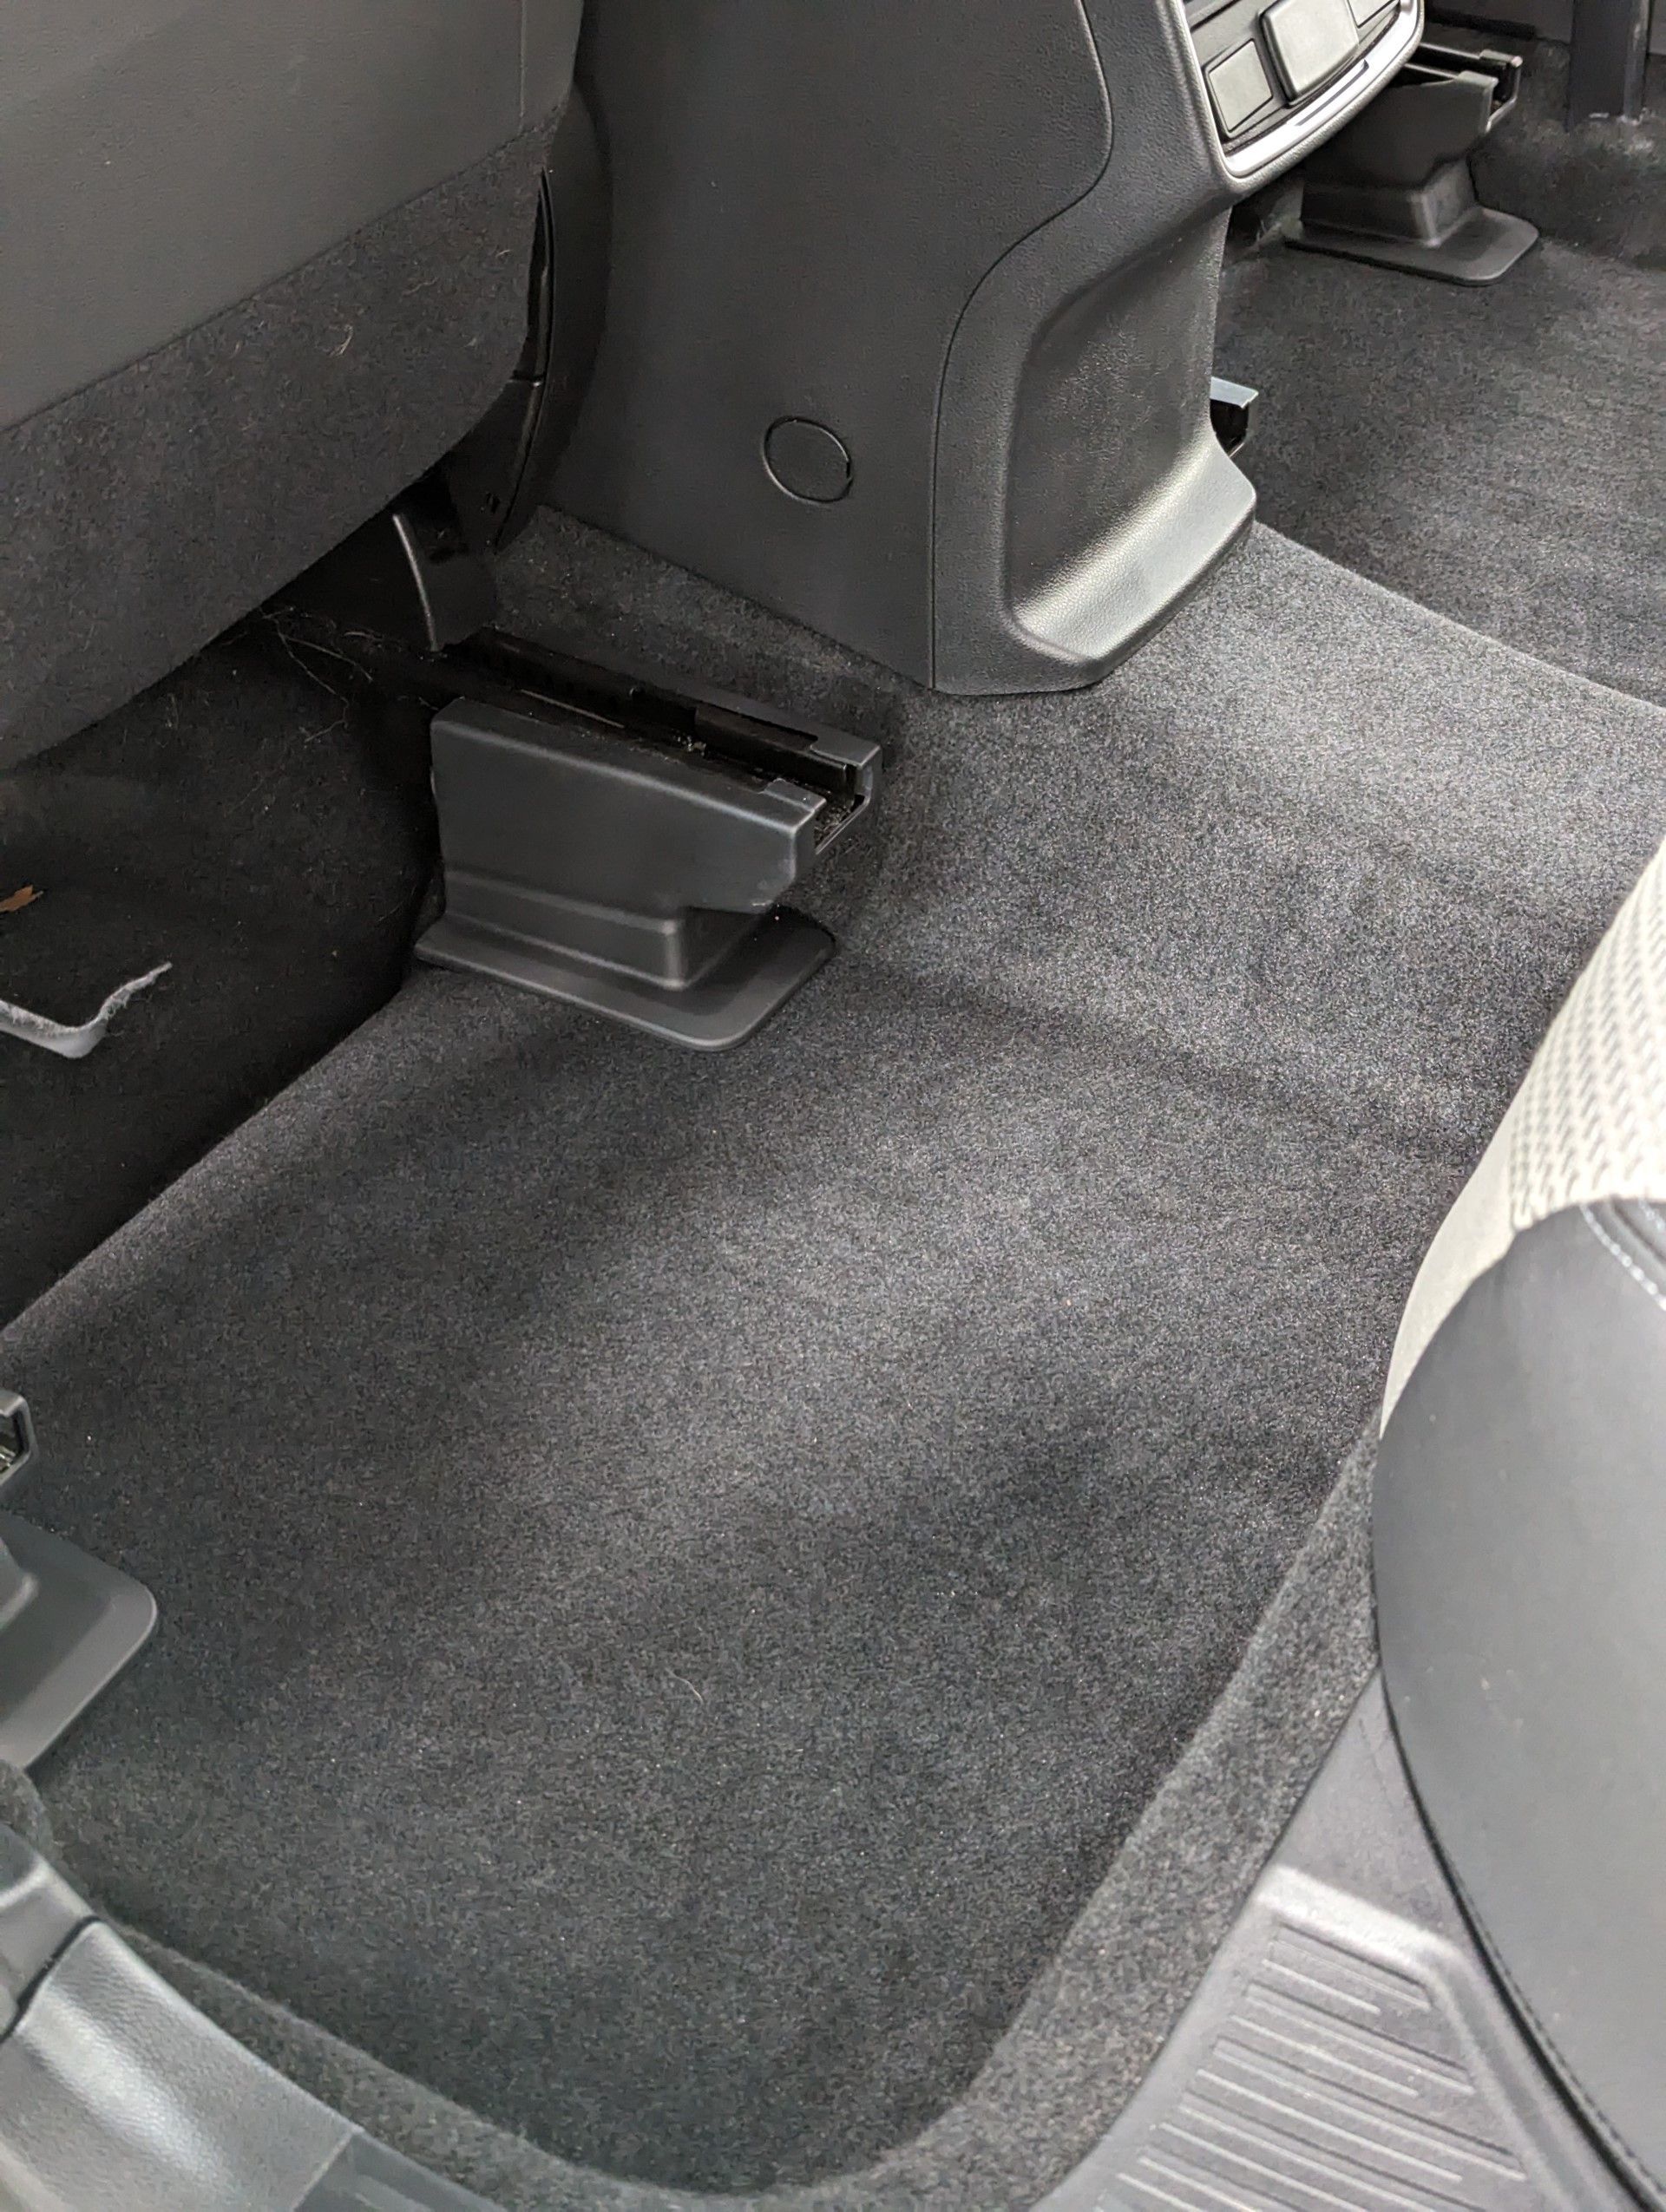 After Interior Detailing - A close up of the floor of a car with a carpeted floor.